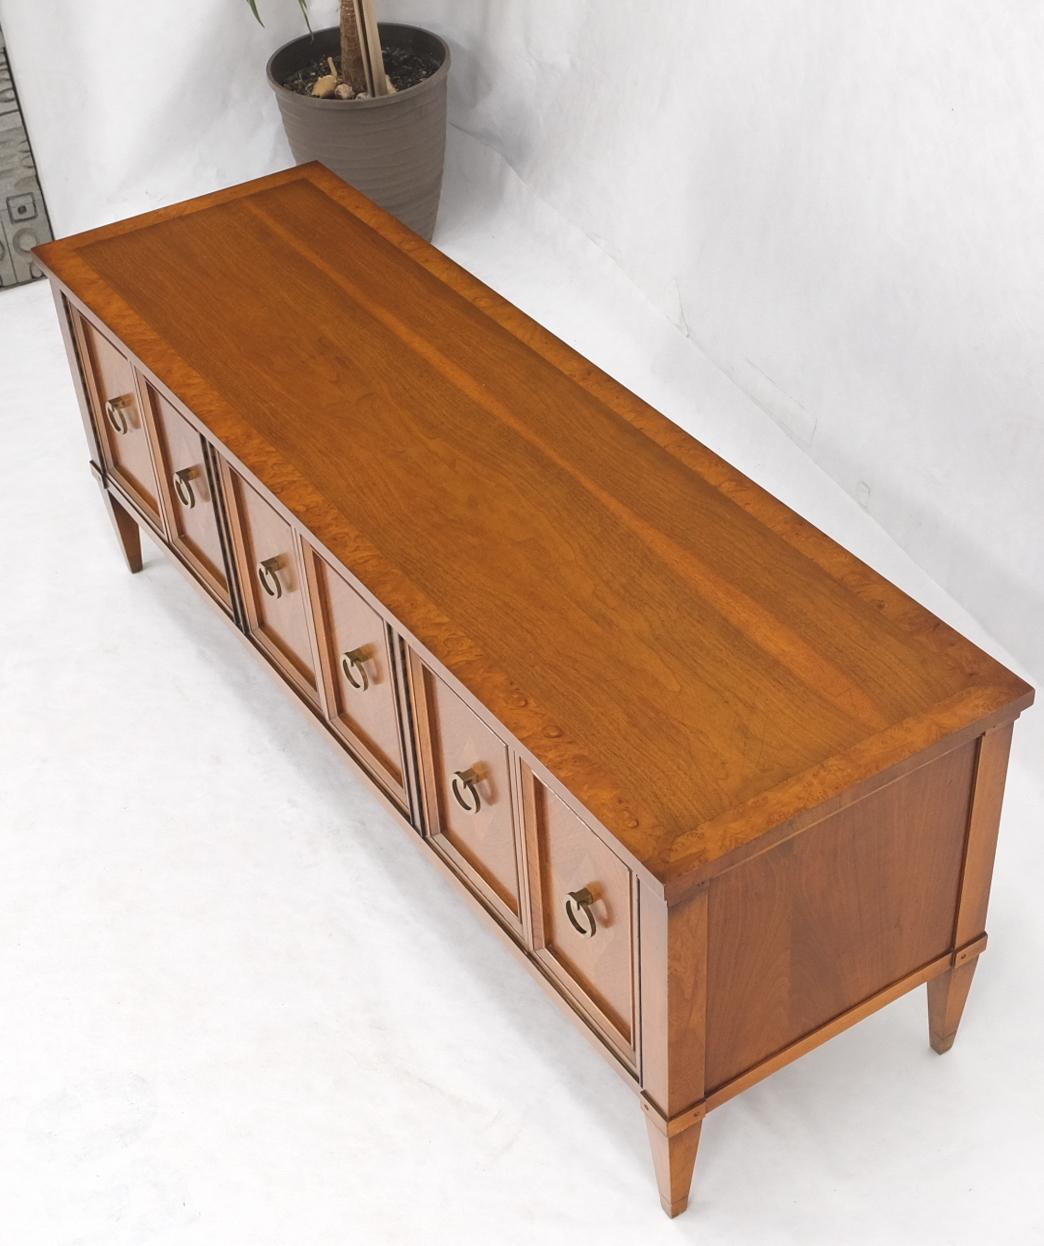 Mid-Century Modern light walnut banded top brass rings drop pulls 3 compartments petit credenza console.